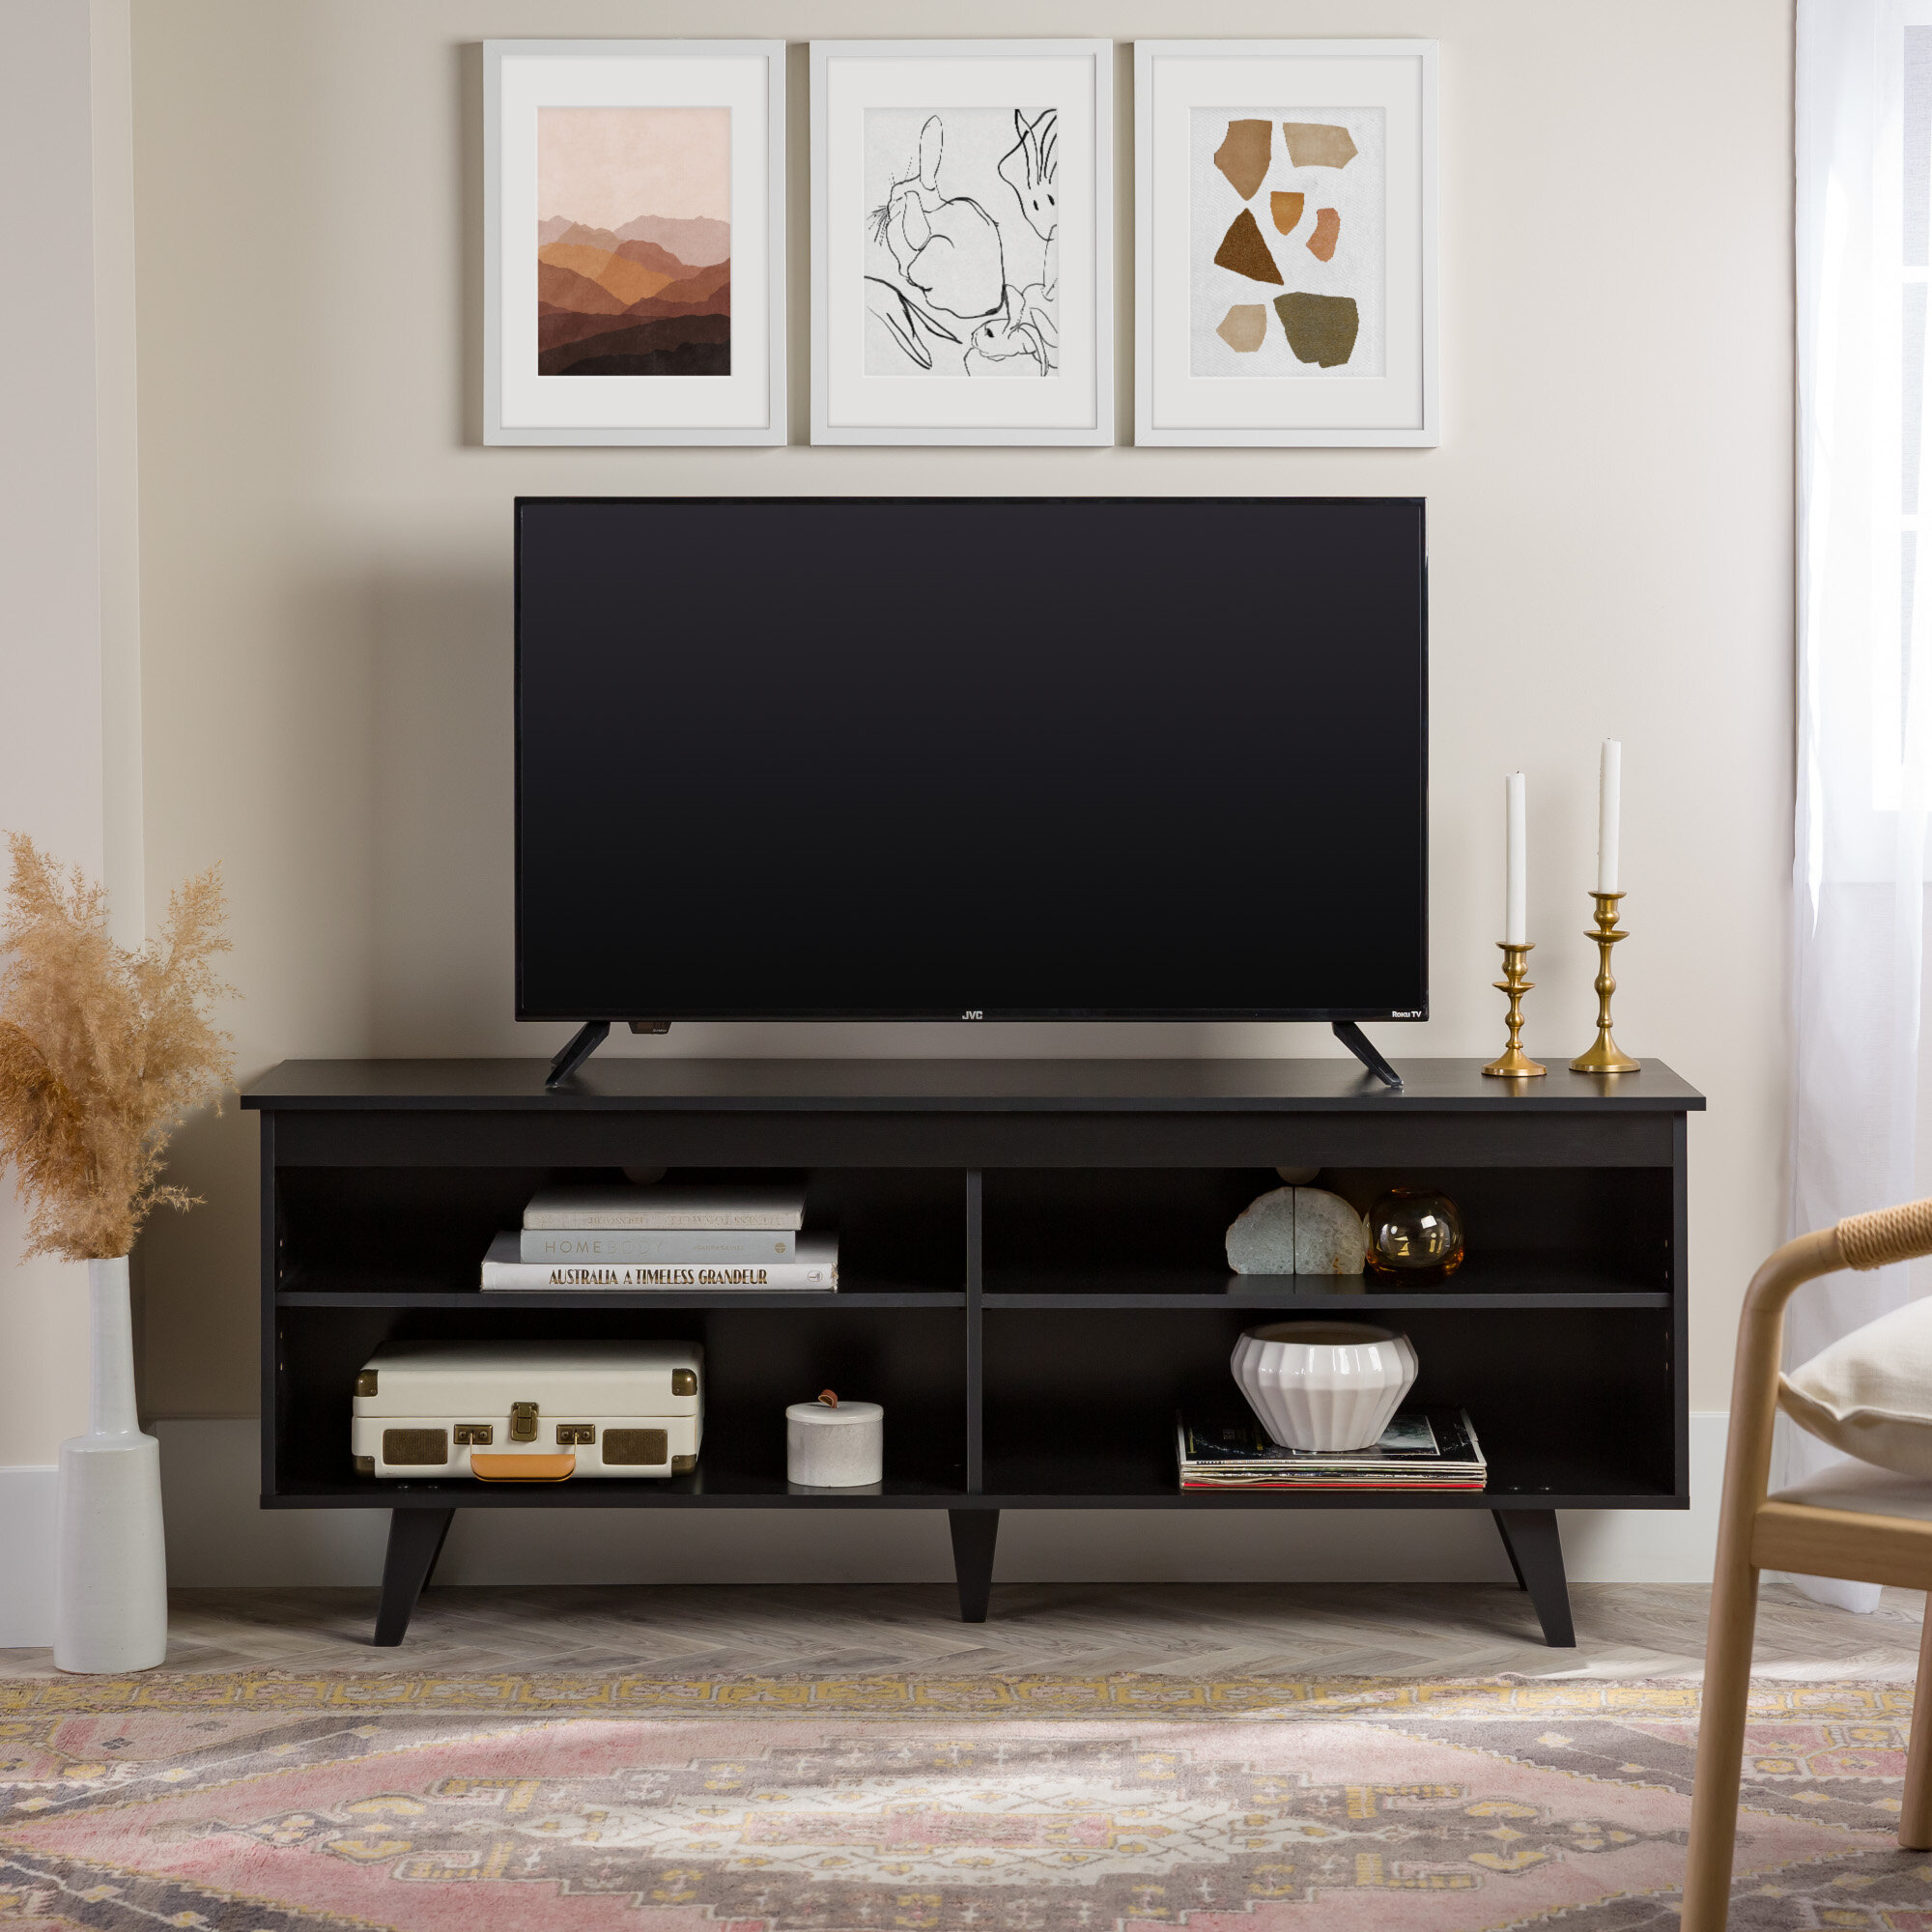 Black TV Stand Media Entertainment Center 43 x 13 Inch 60 Lbs Table Home Office 